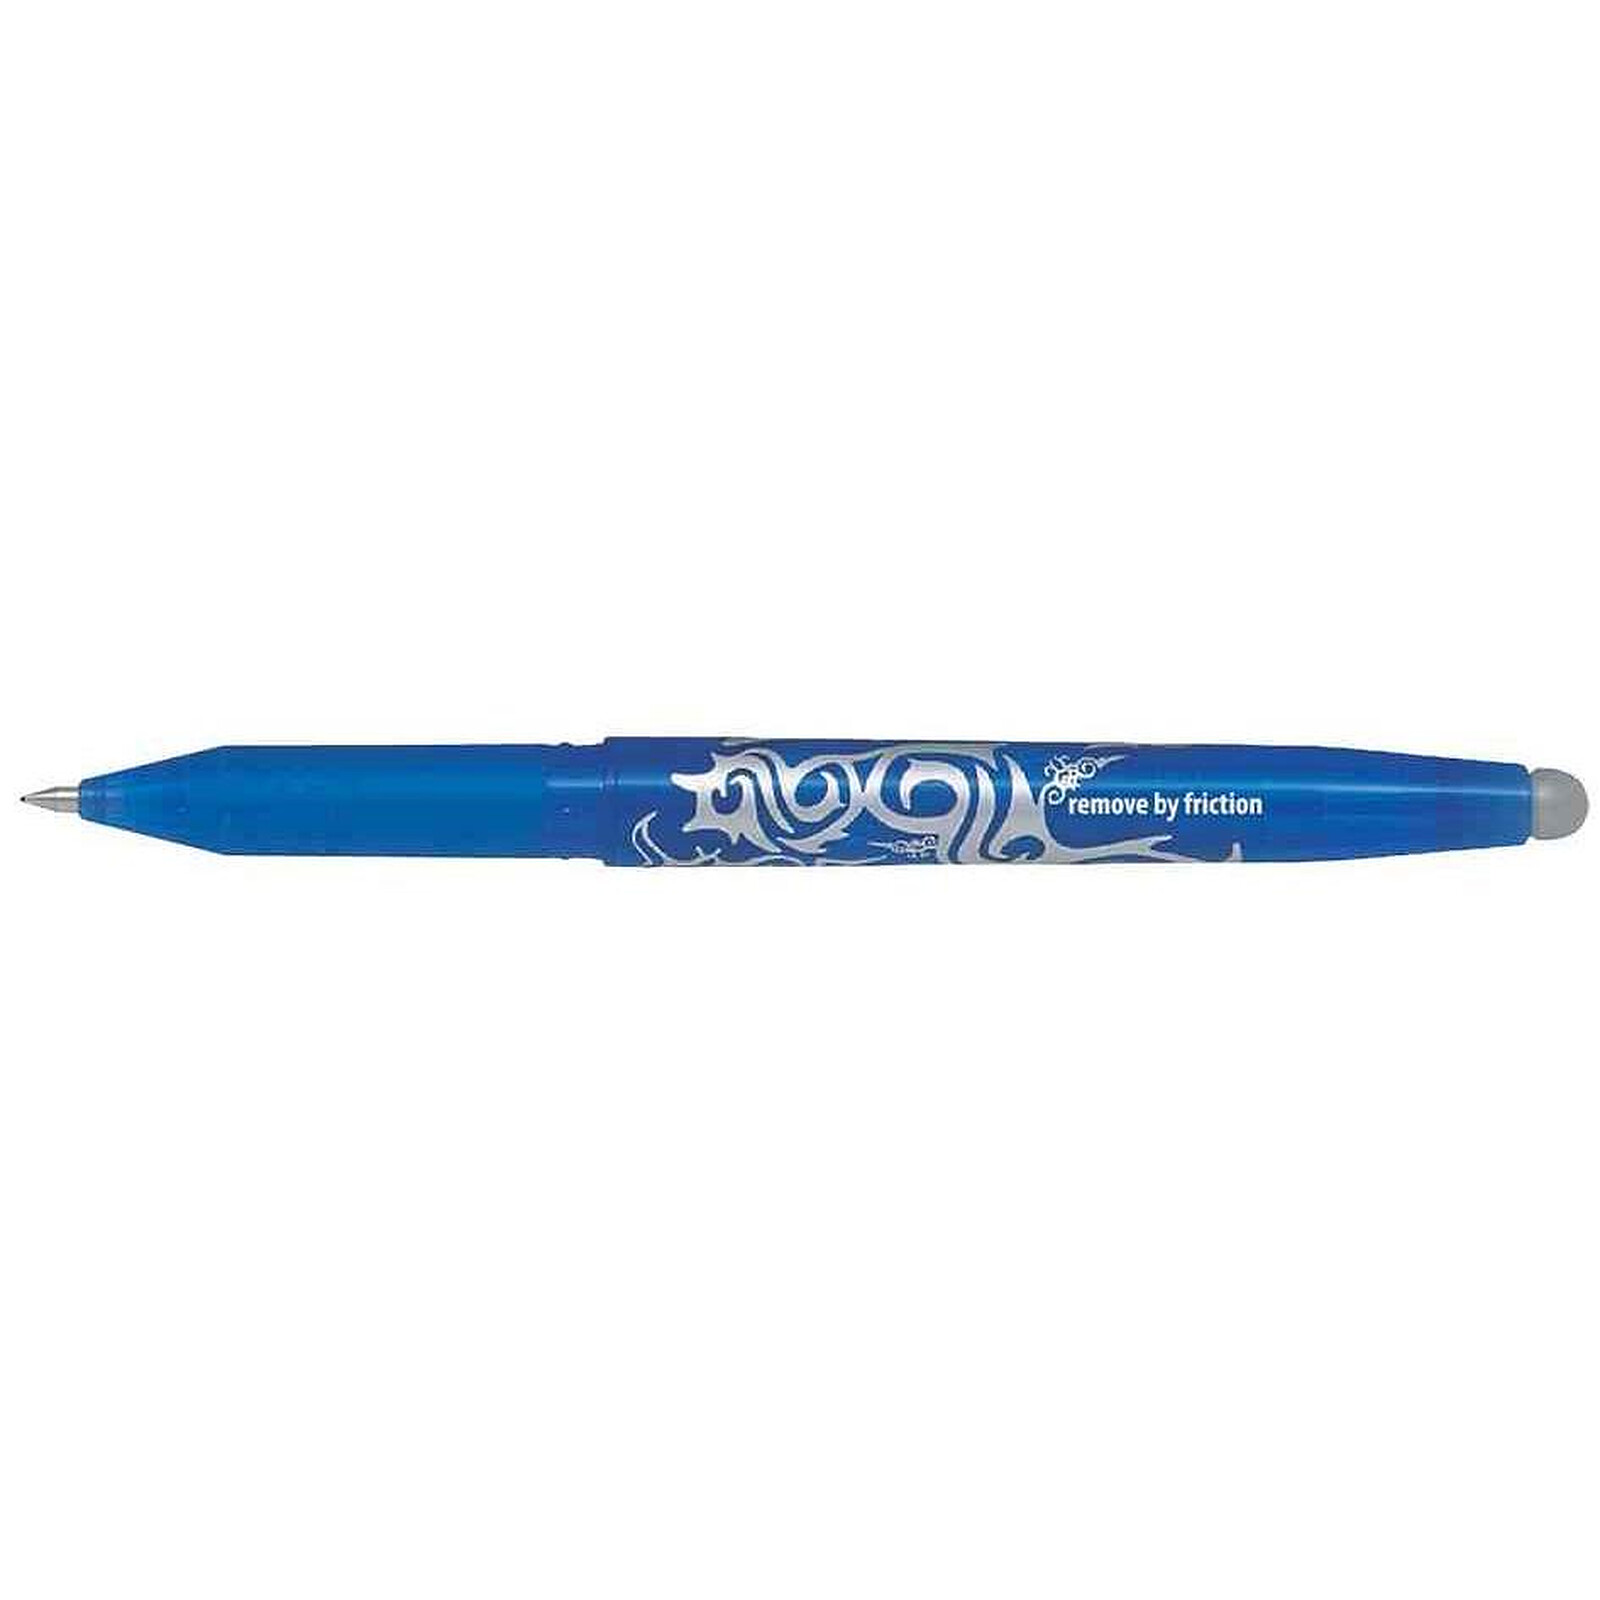 PILOT Recharges pour FriXion Ball Turquoise pointe 0,7mm - Stylo